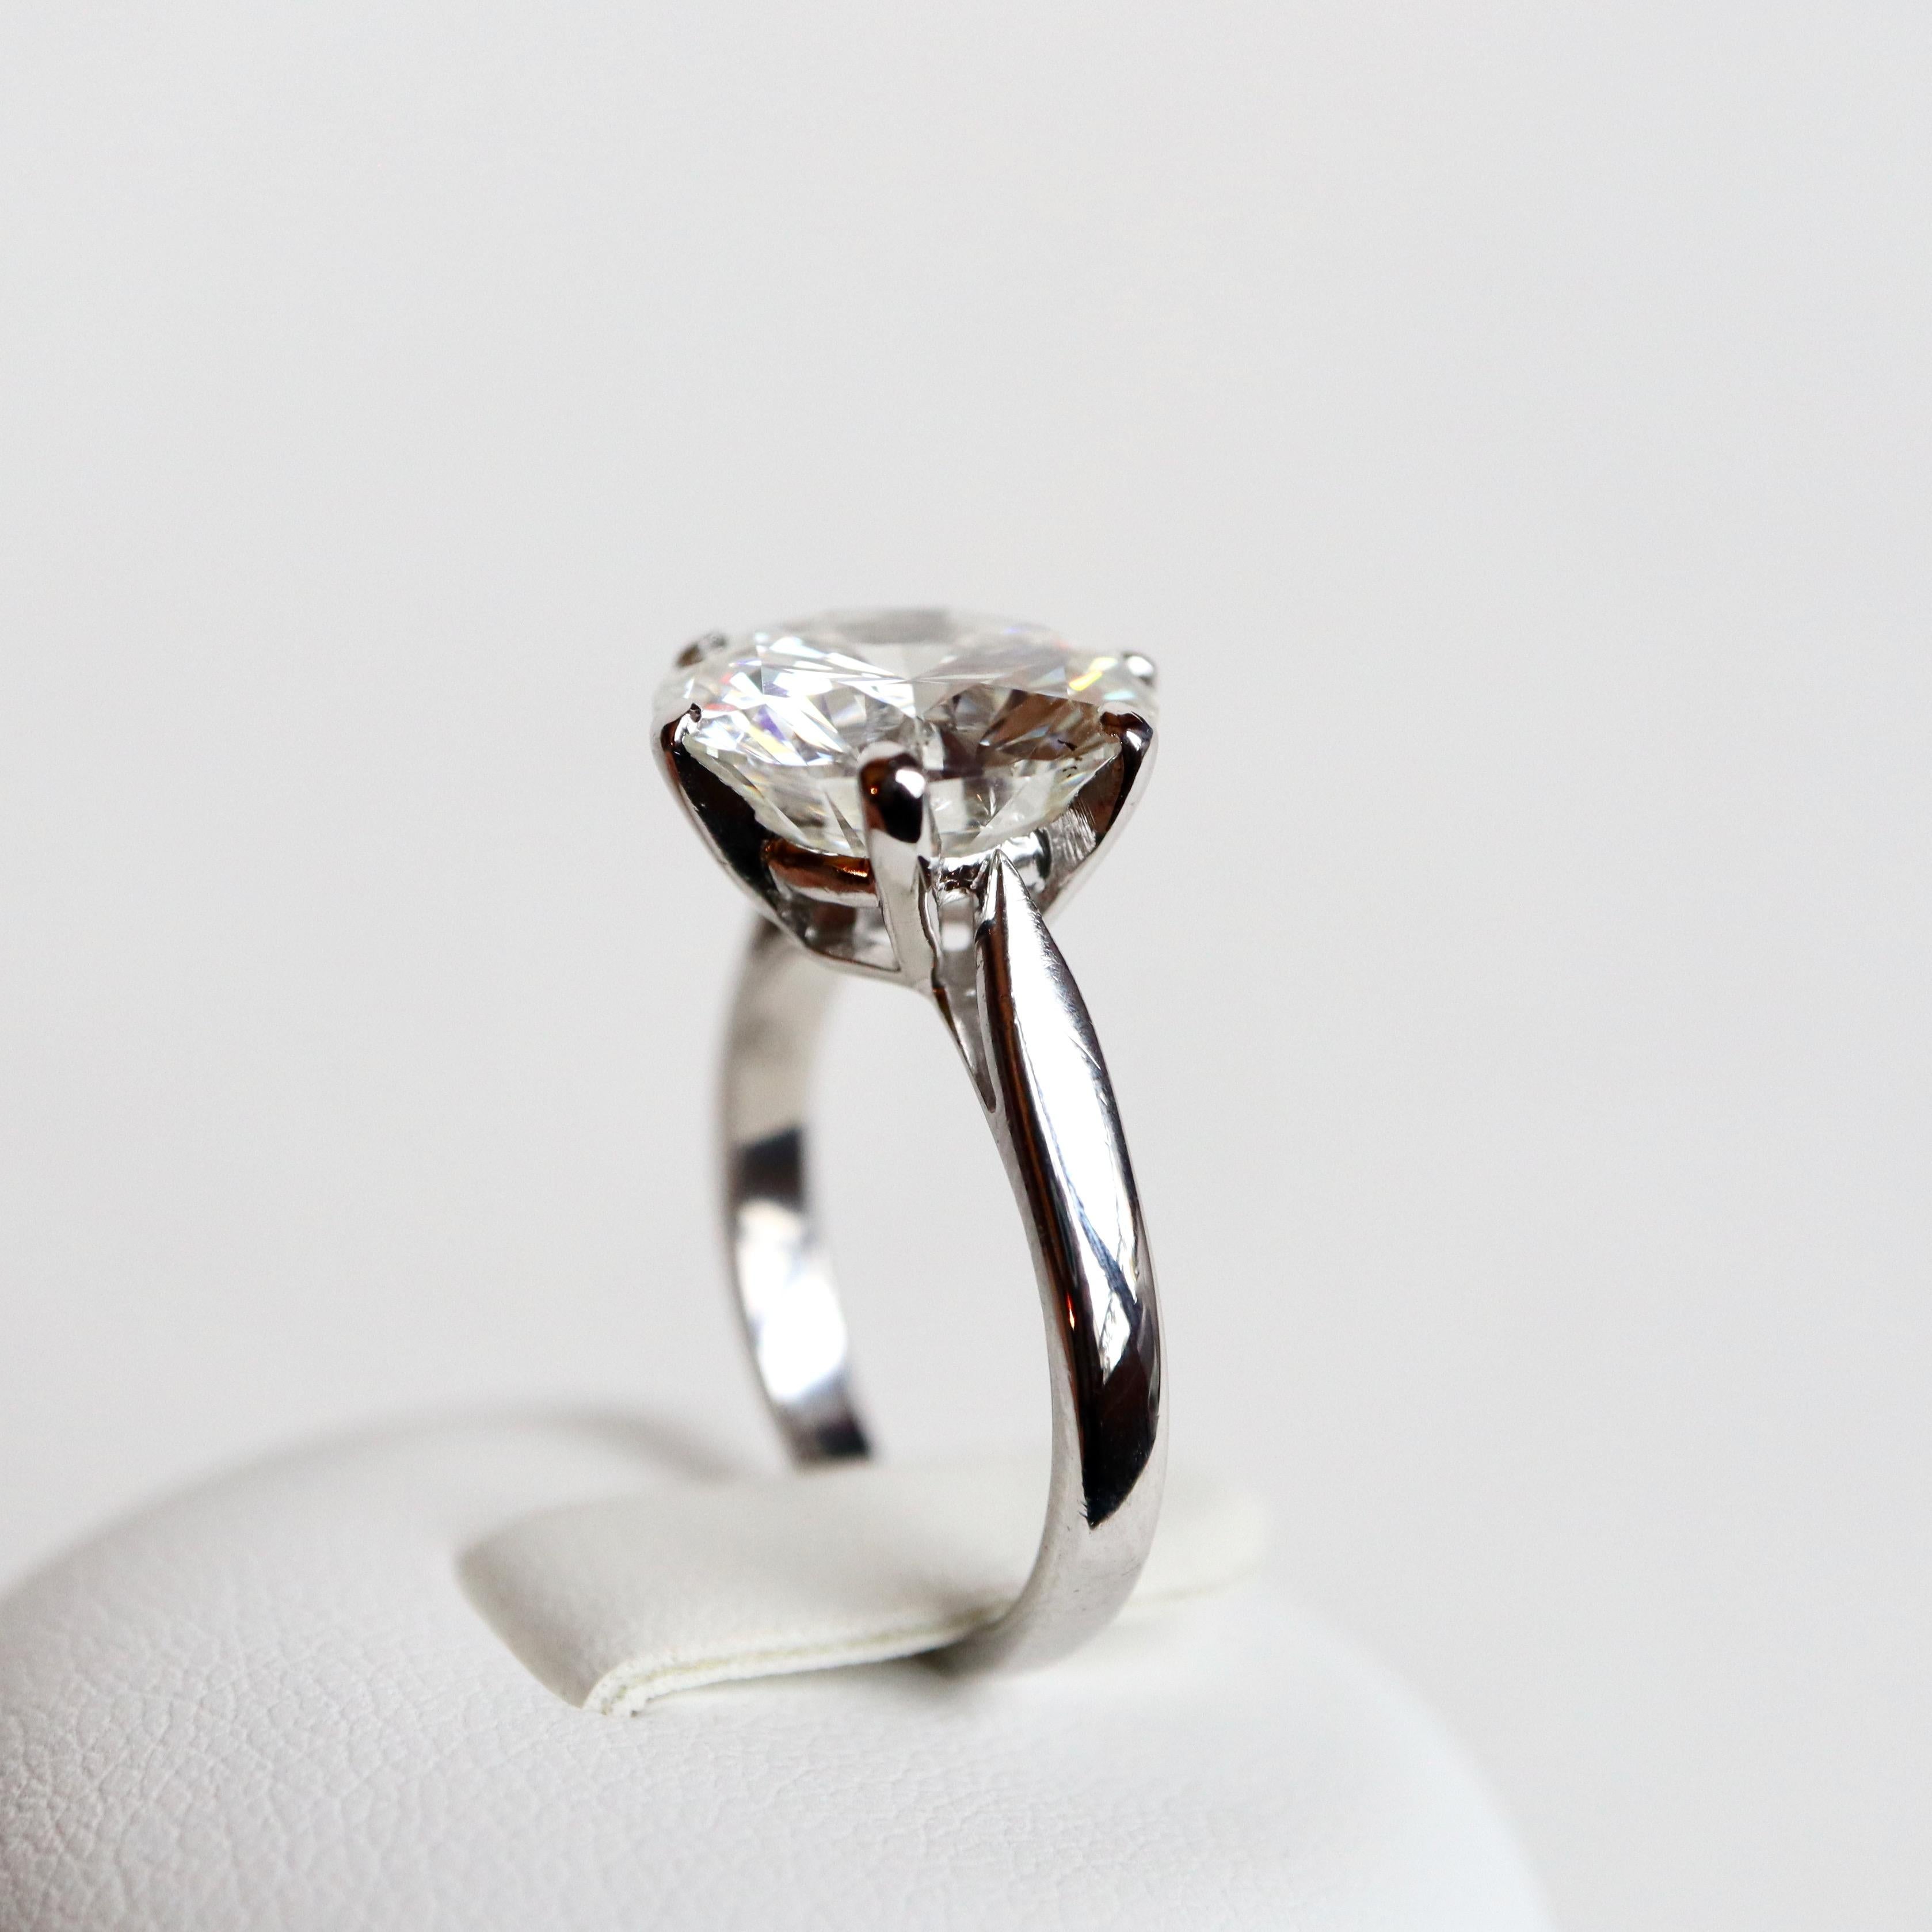 Solitaire Ring with a 5.23 Carat Diamond in the Center In Good Condition For Sale In Paris, FR